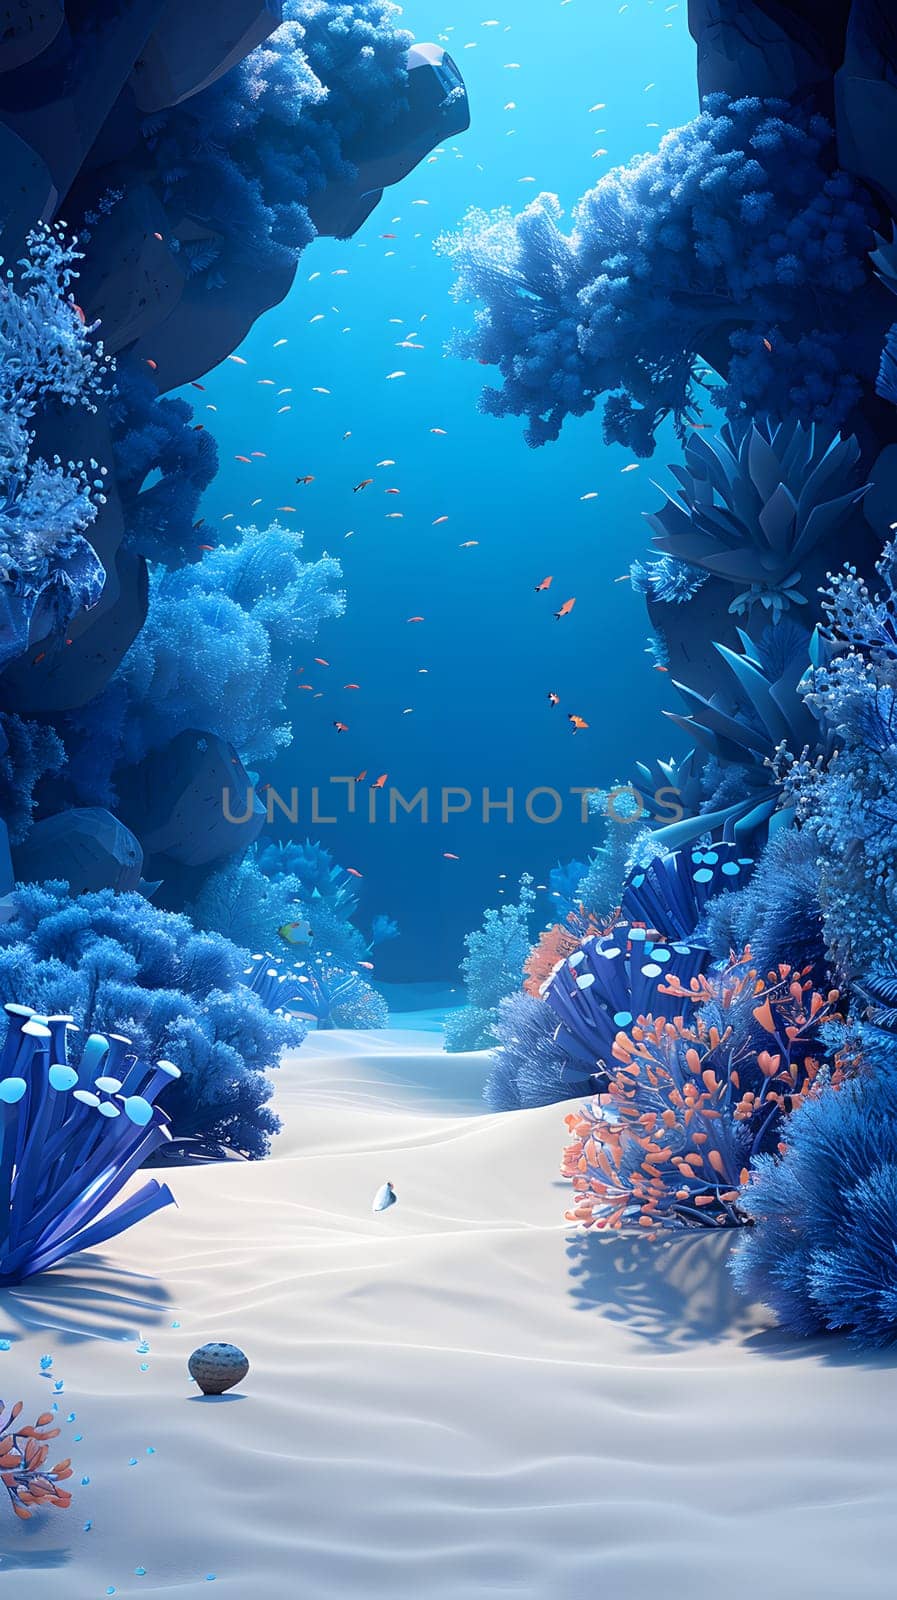 Azure underwater landscape with freezing waters, corals, and diverse marine life by Nadtochiy